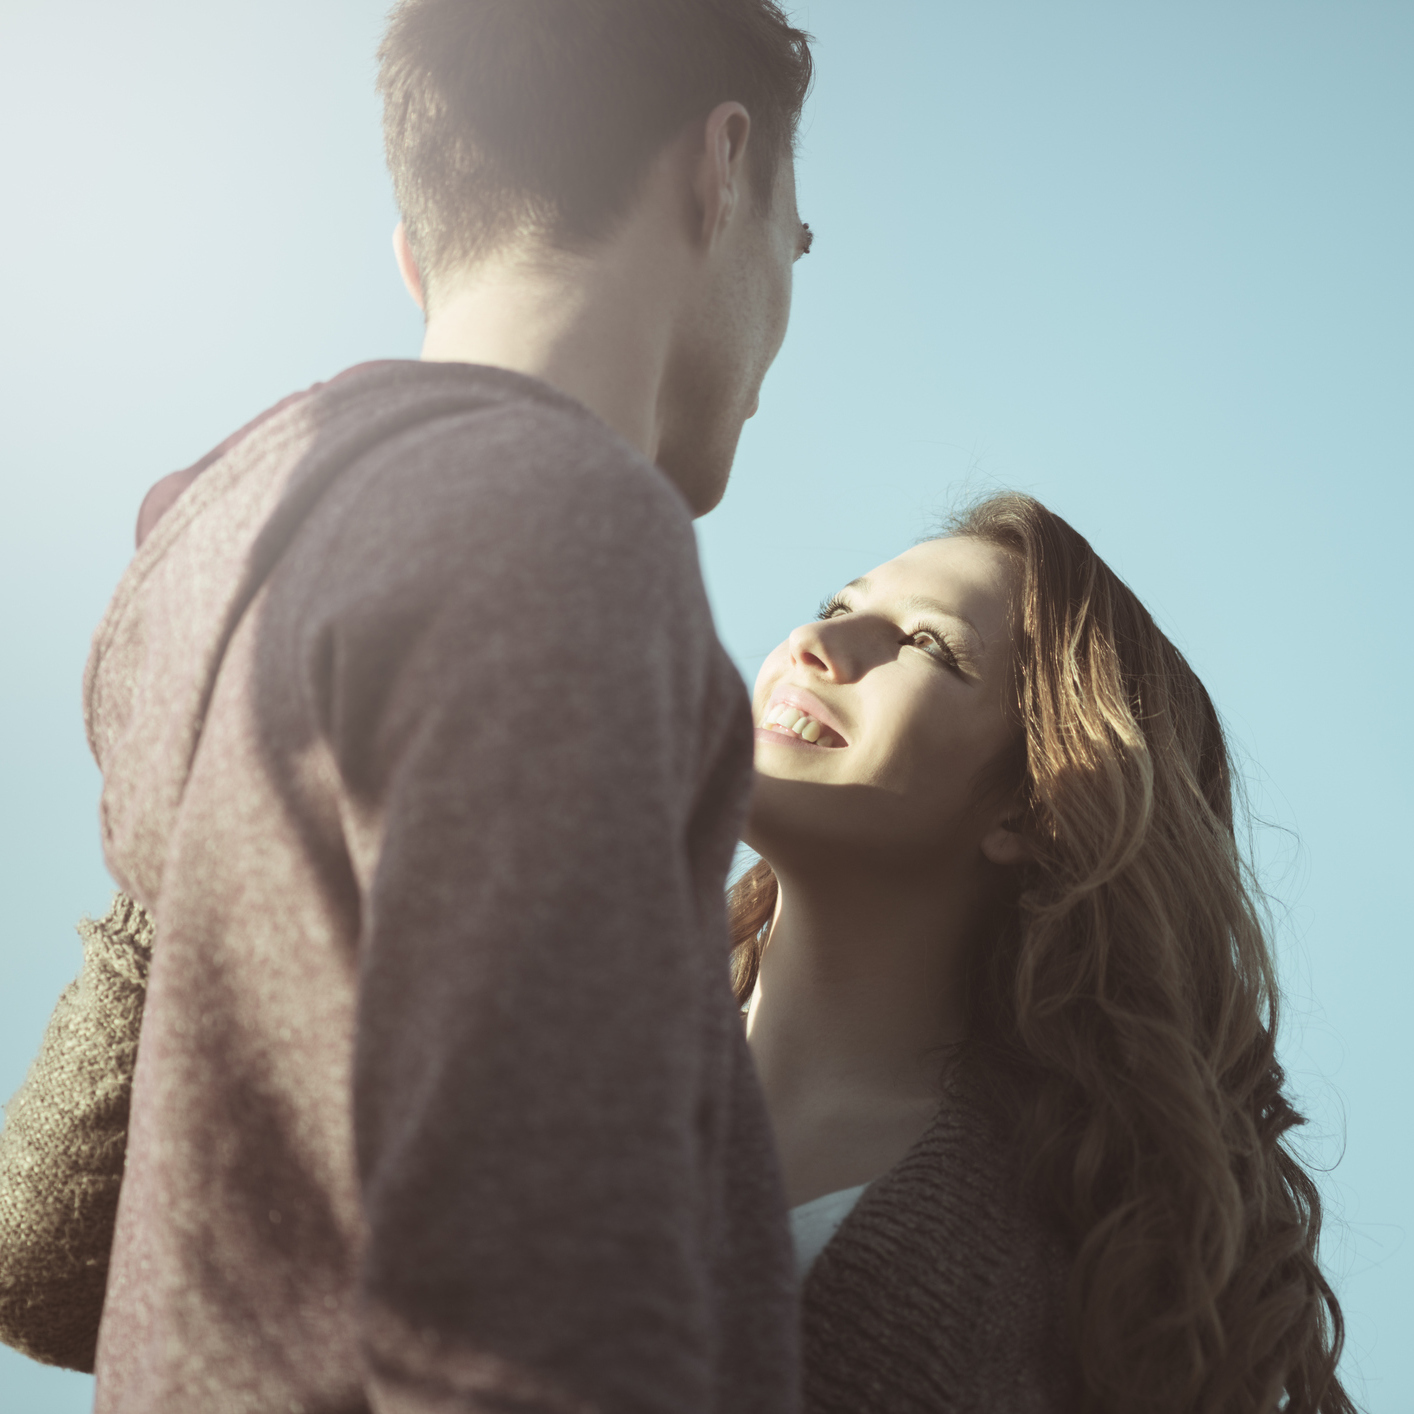 young couple outdoors against blue sky in sunlight looking at each other